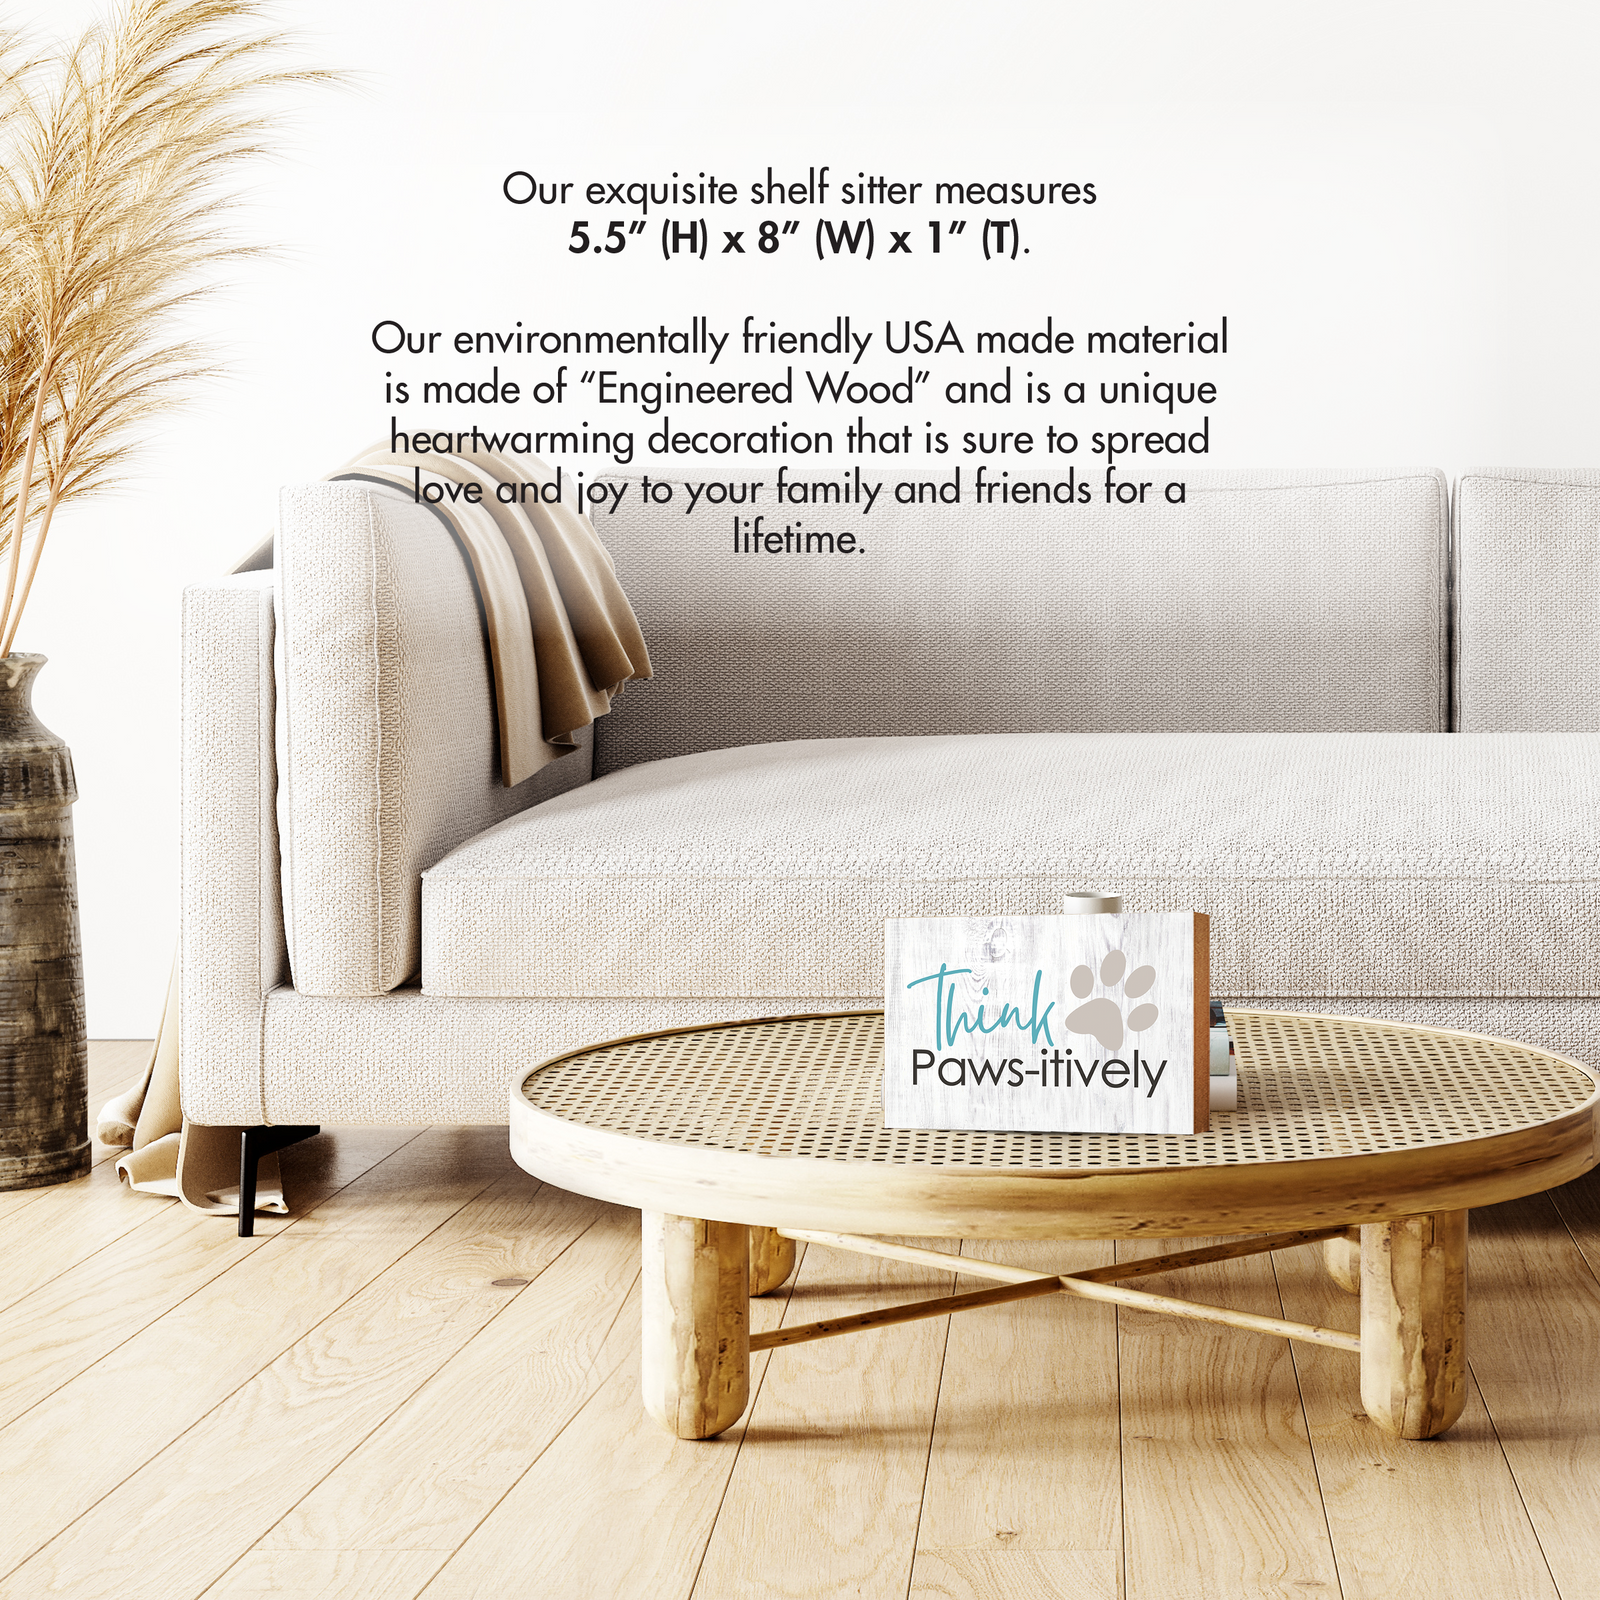 Wooden Shelf Decor and Tabletop Signs with Pet Verses - Pawsitively